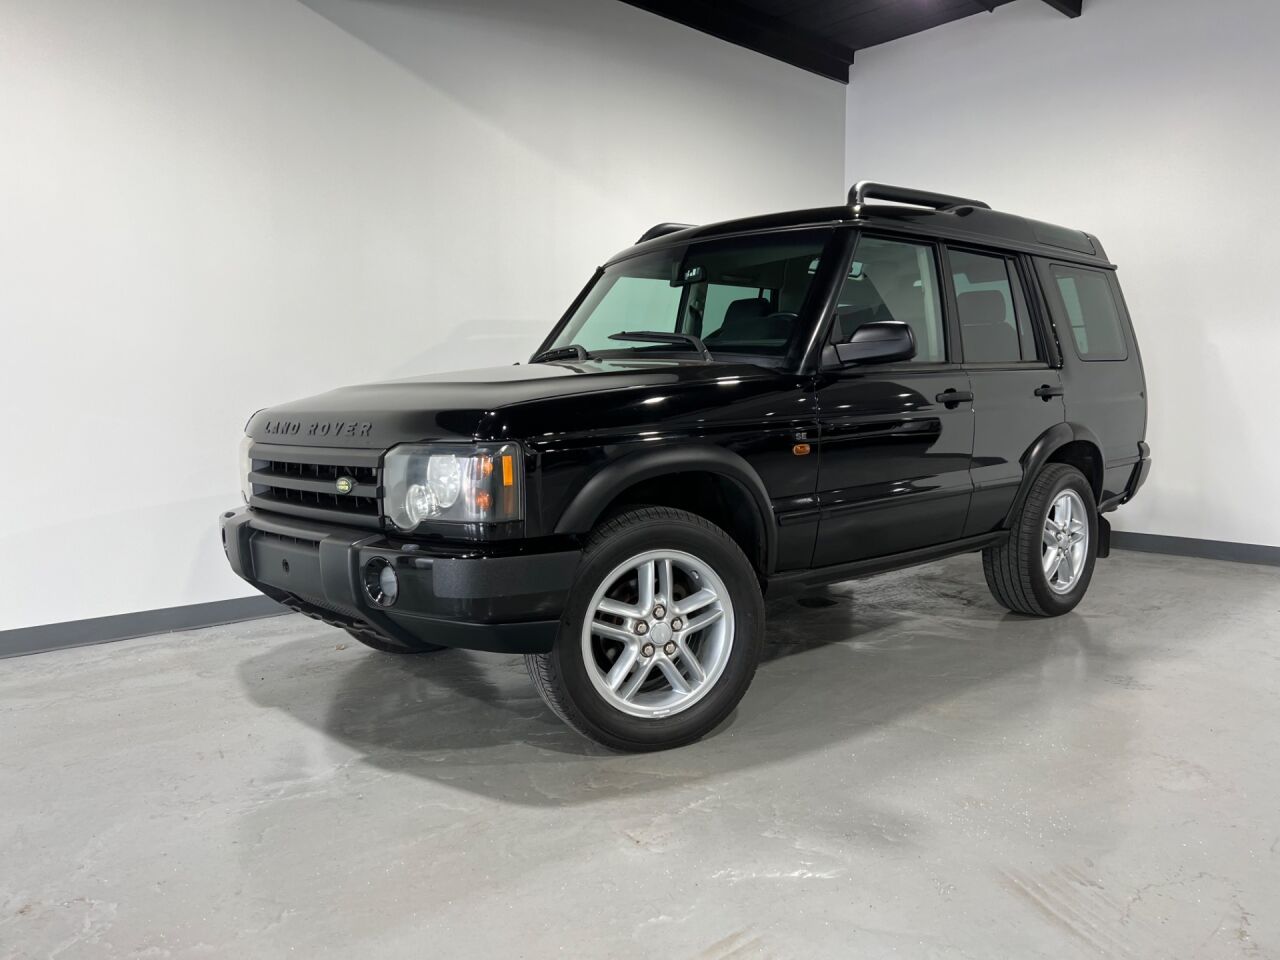 2004 Land Rover Discovery For Sale - Carsforsale.com®